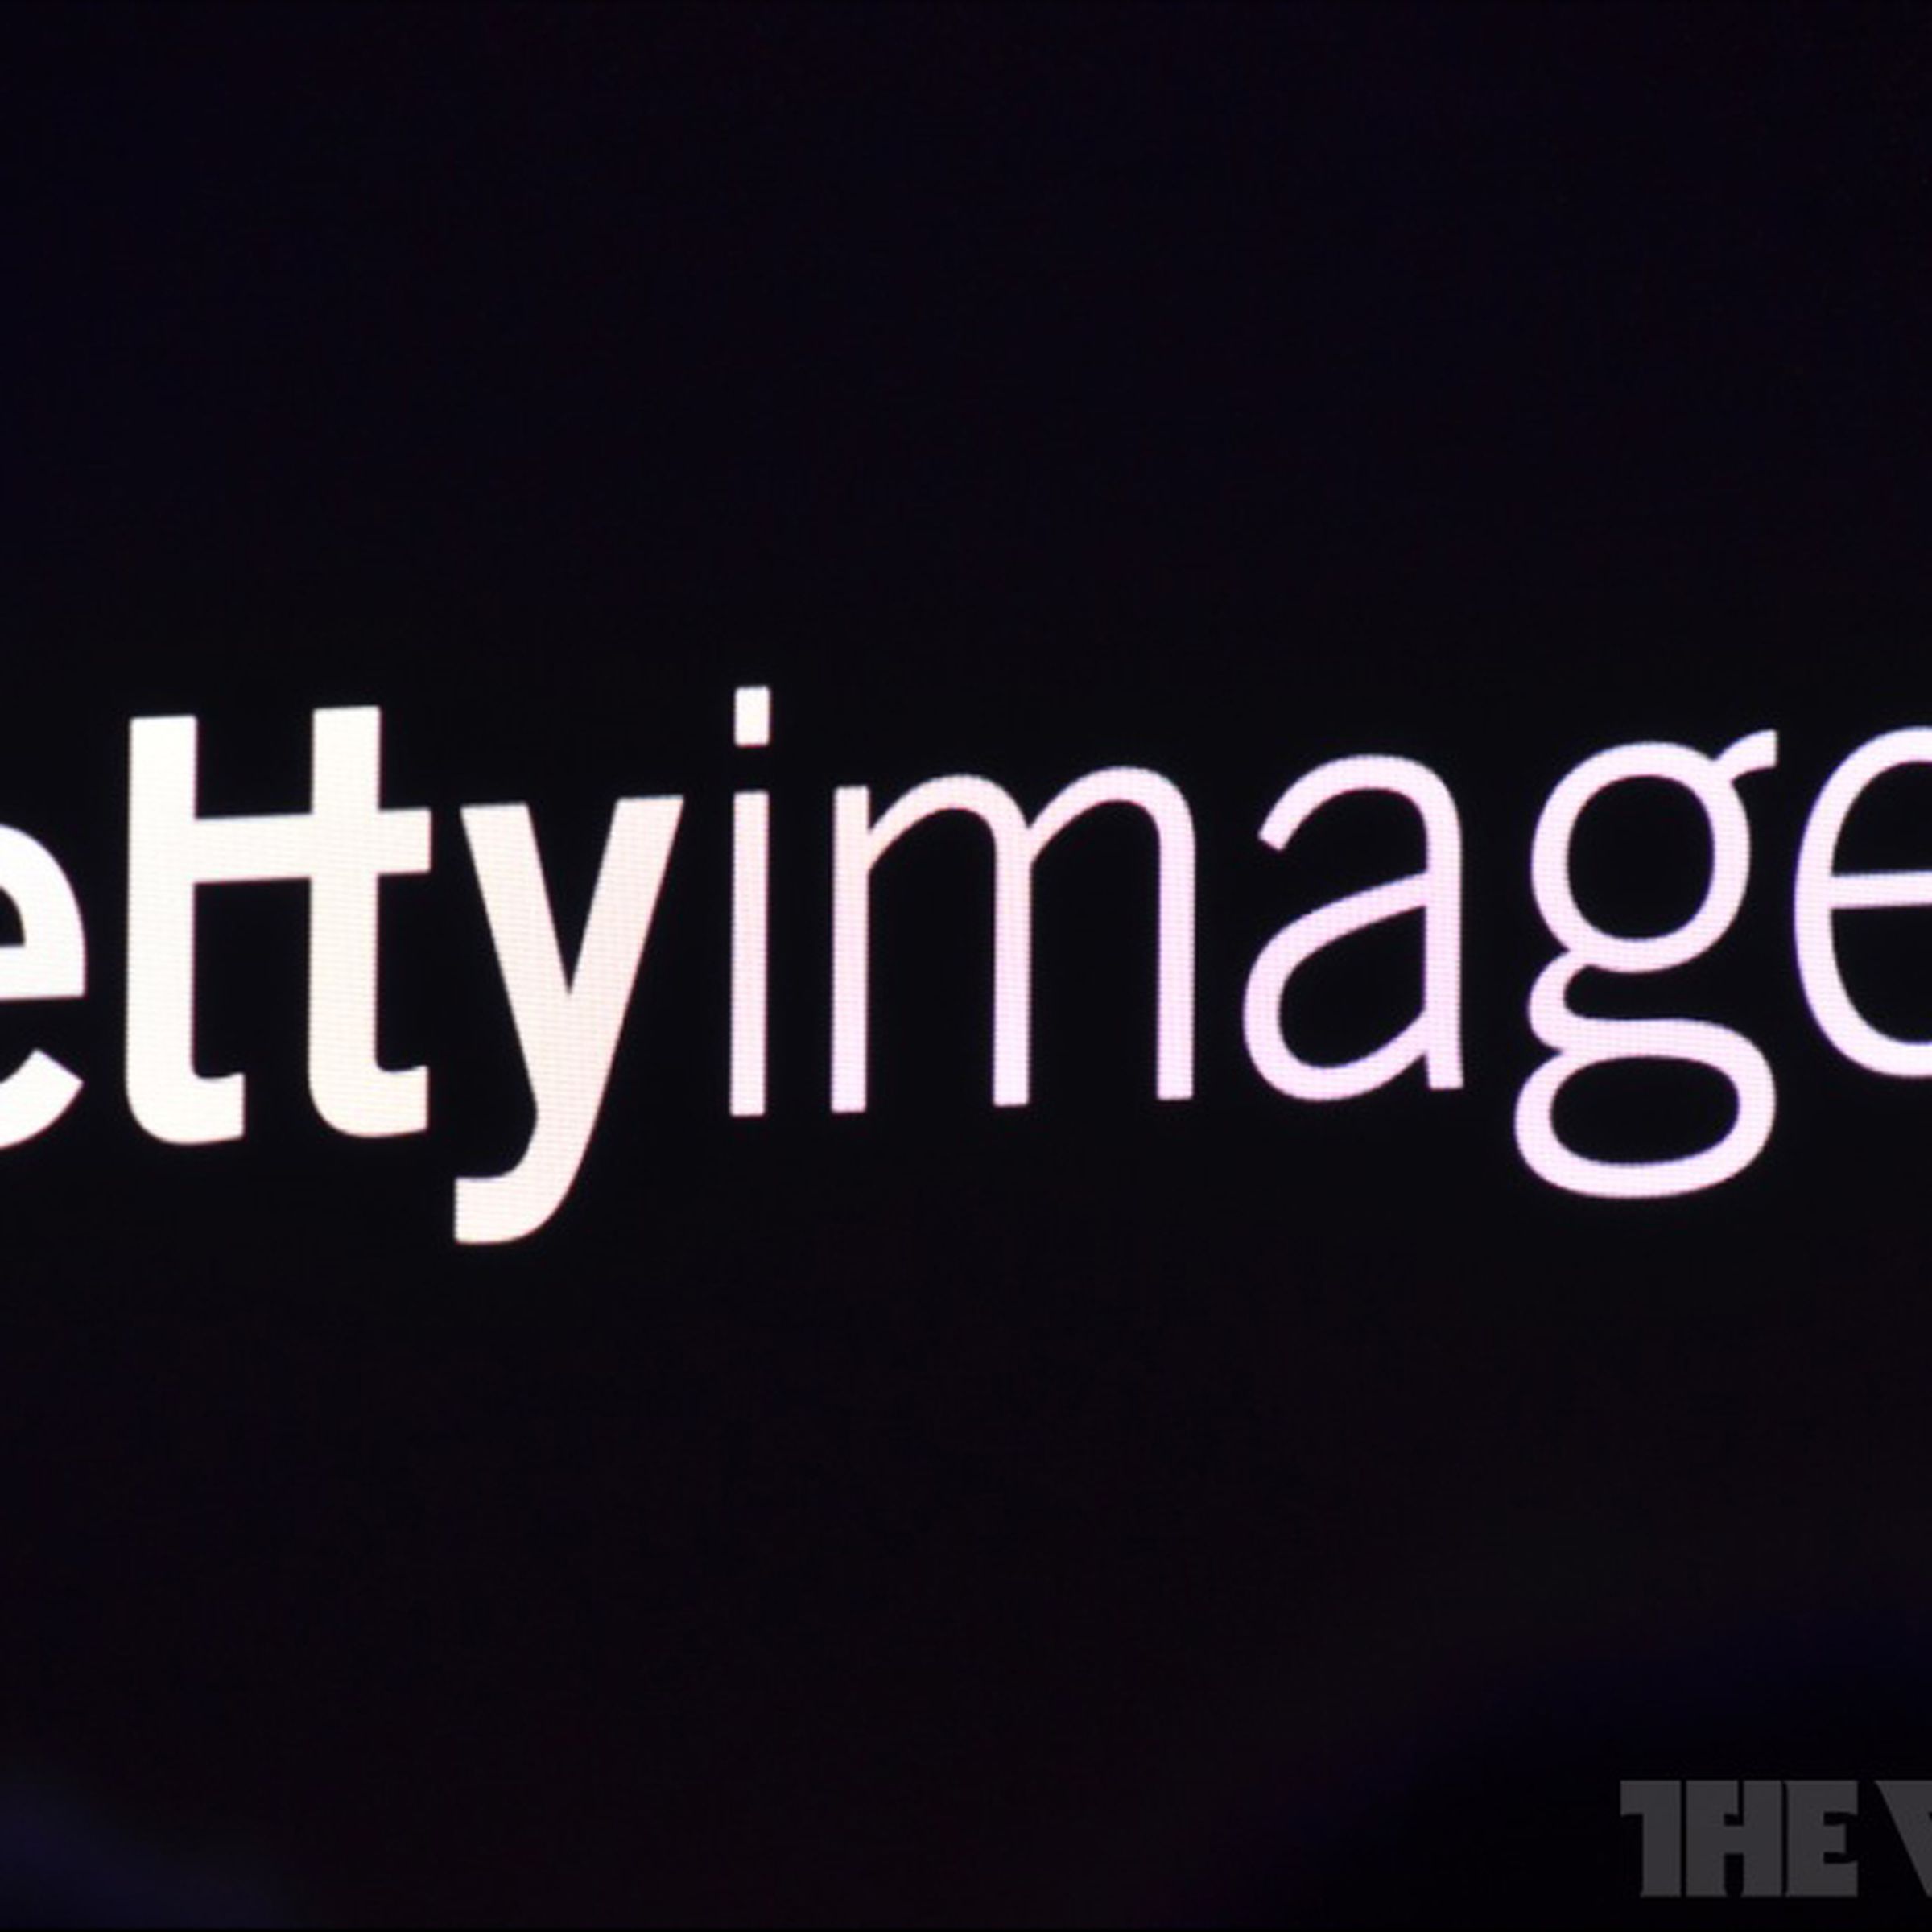 Getty Images stock